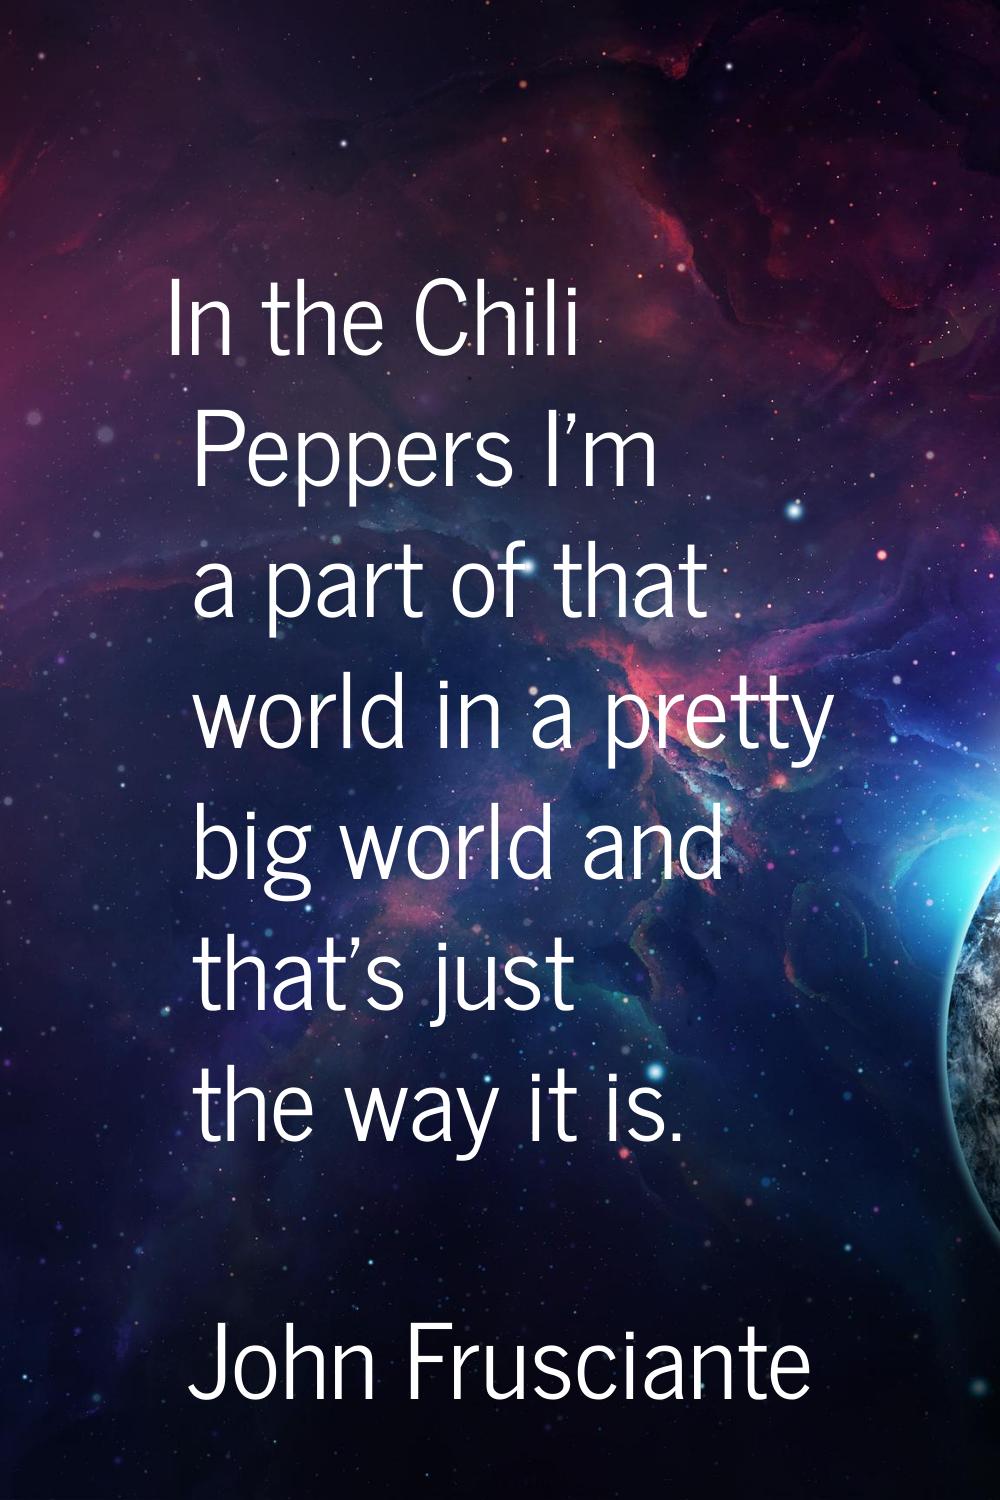 In the Chili Peppers I'm a part of that world in a pretty big world and that's just the way it is.